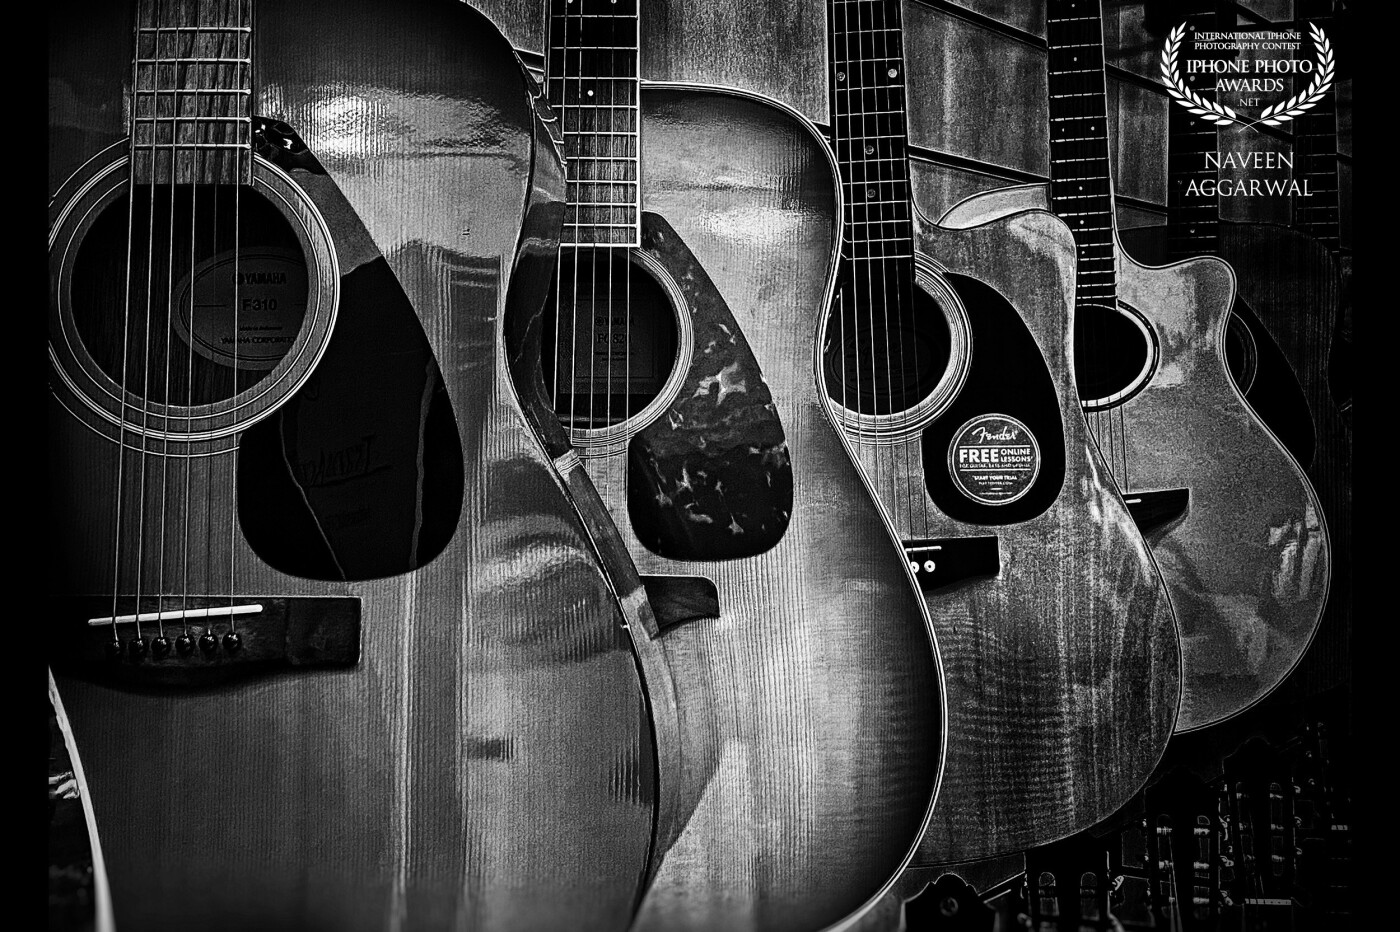 You can find patterns everywhere and you will find at any corner in this world <br />
A beautiful collection of guitars at Music Shop in Deira, Dubai, UAE